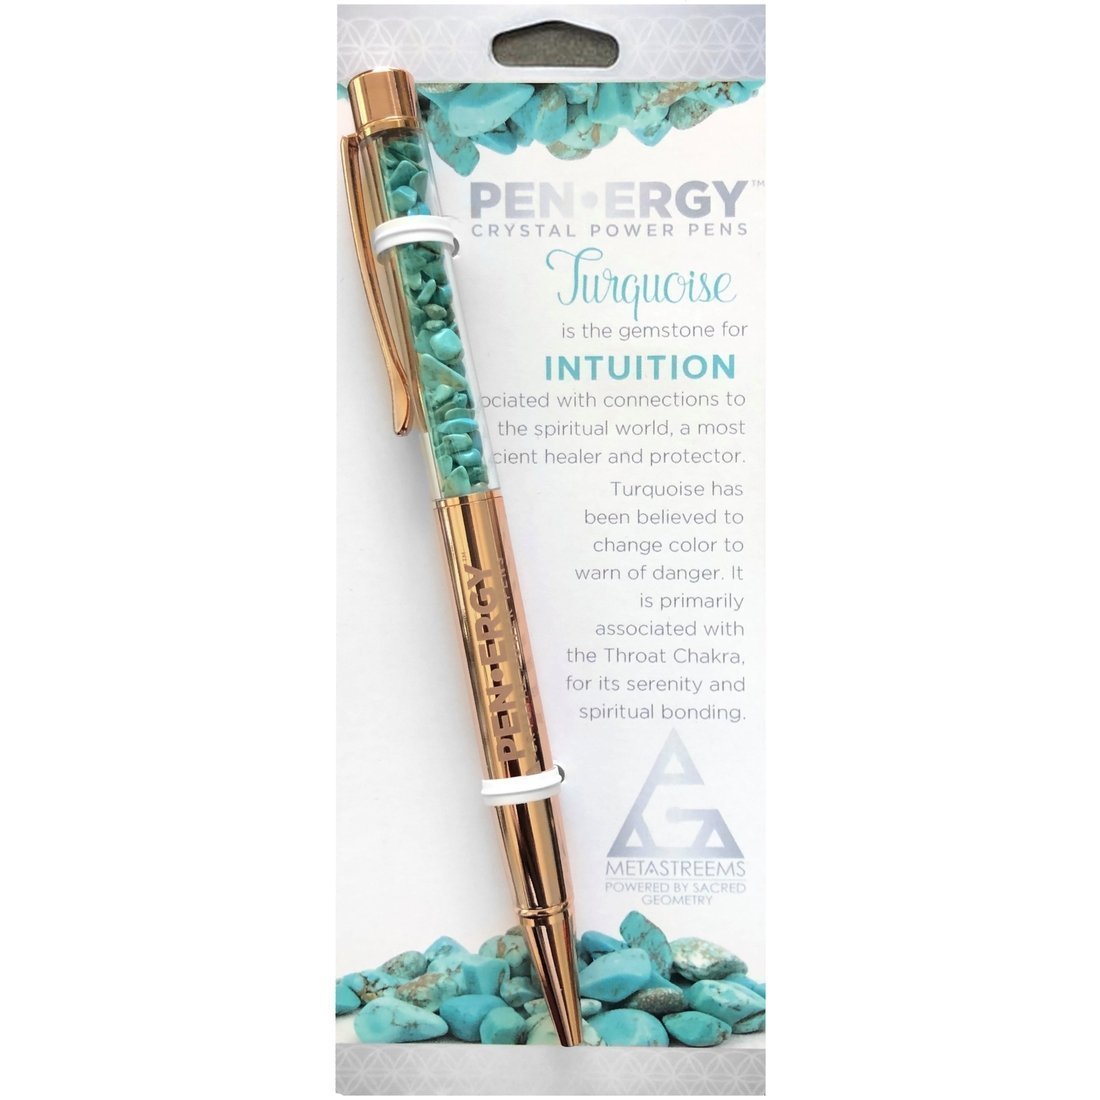 Pen-Ergy Crystal Power Pens - Turquoise - Intuition - Pisces